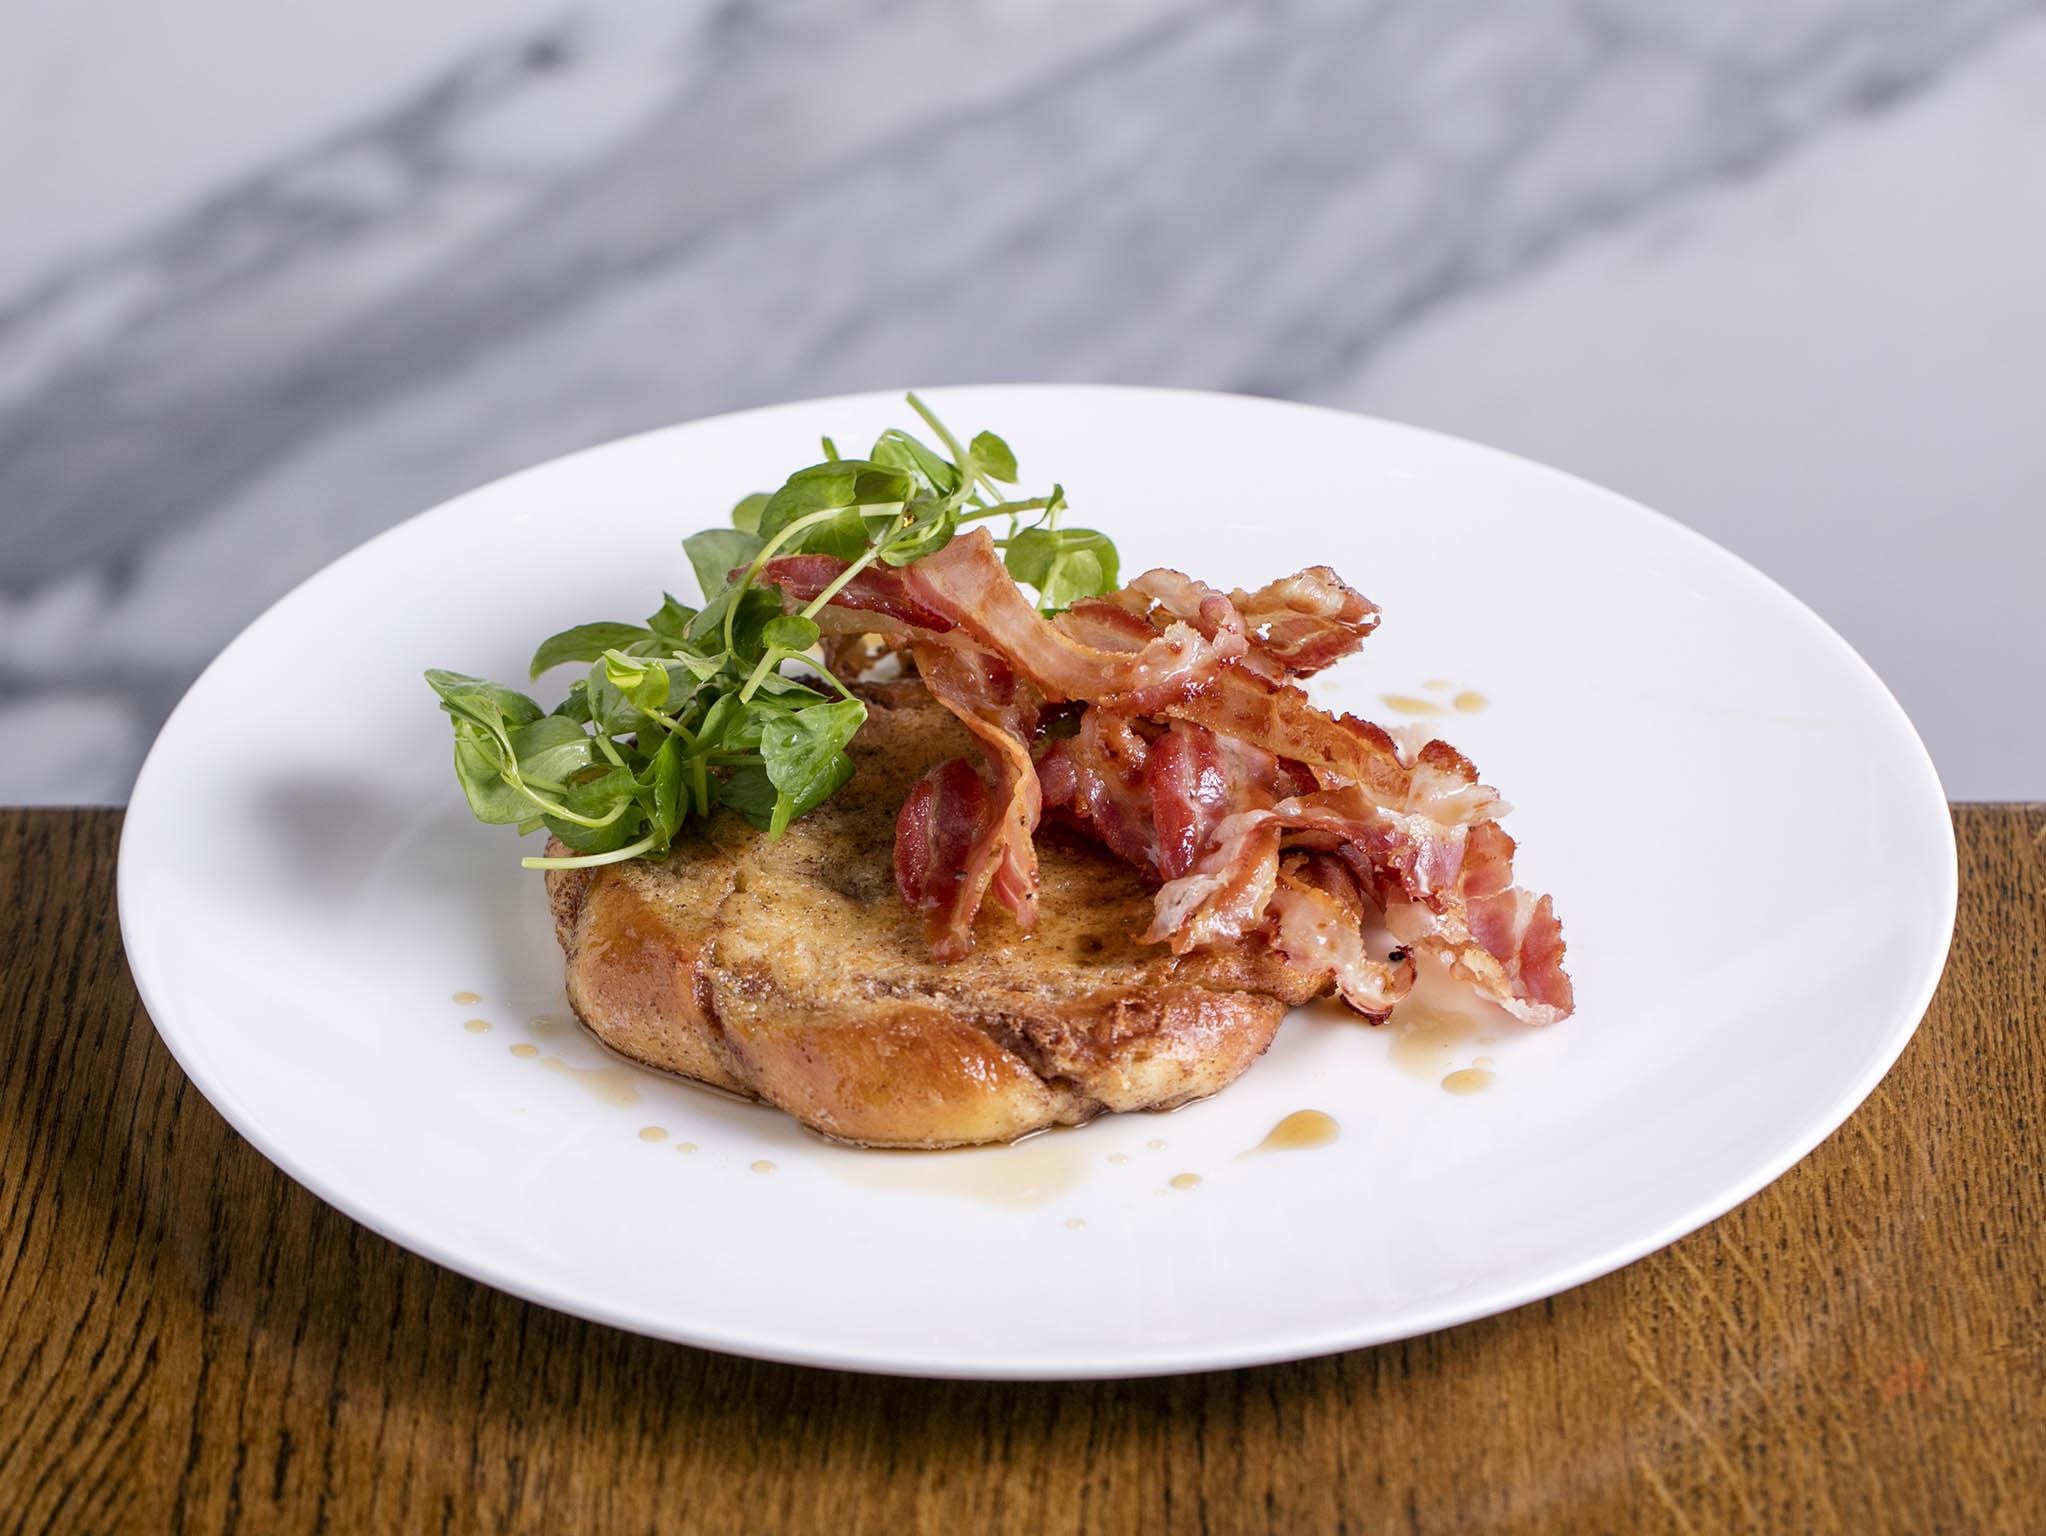 Cinnamon bun French toast with bacon is one of the options on Aster’s brunch menu